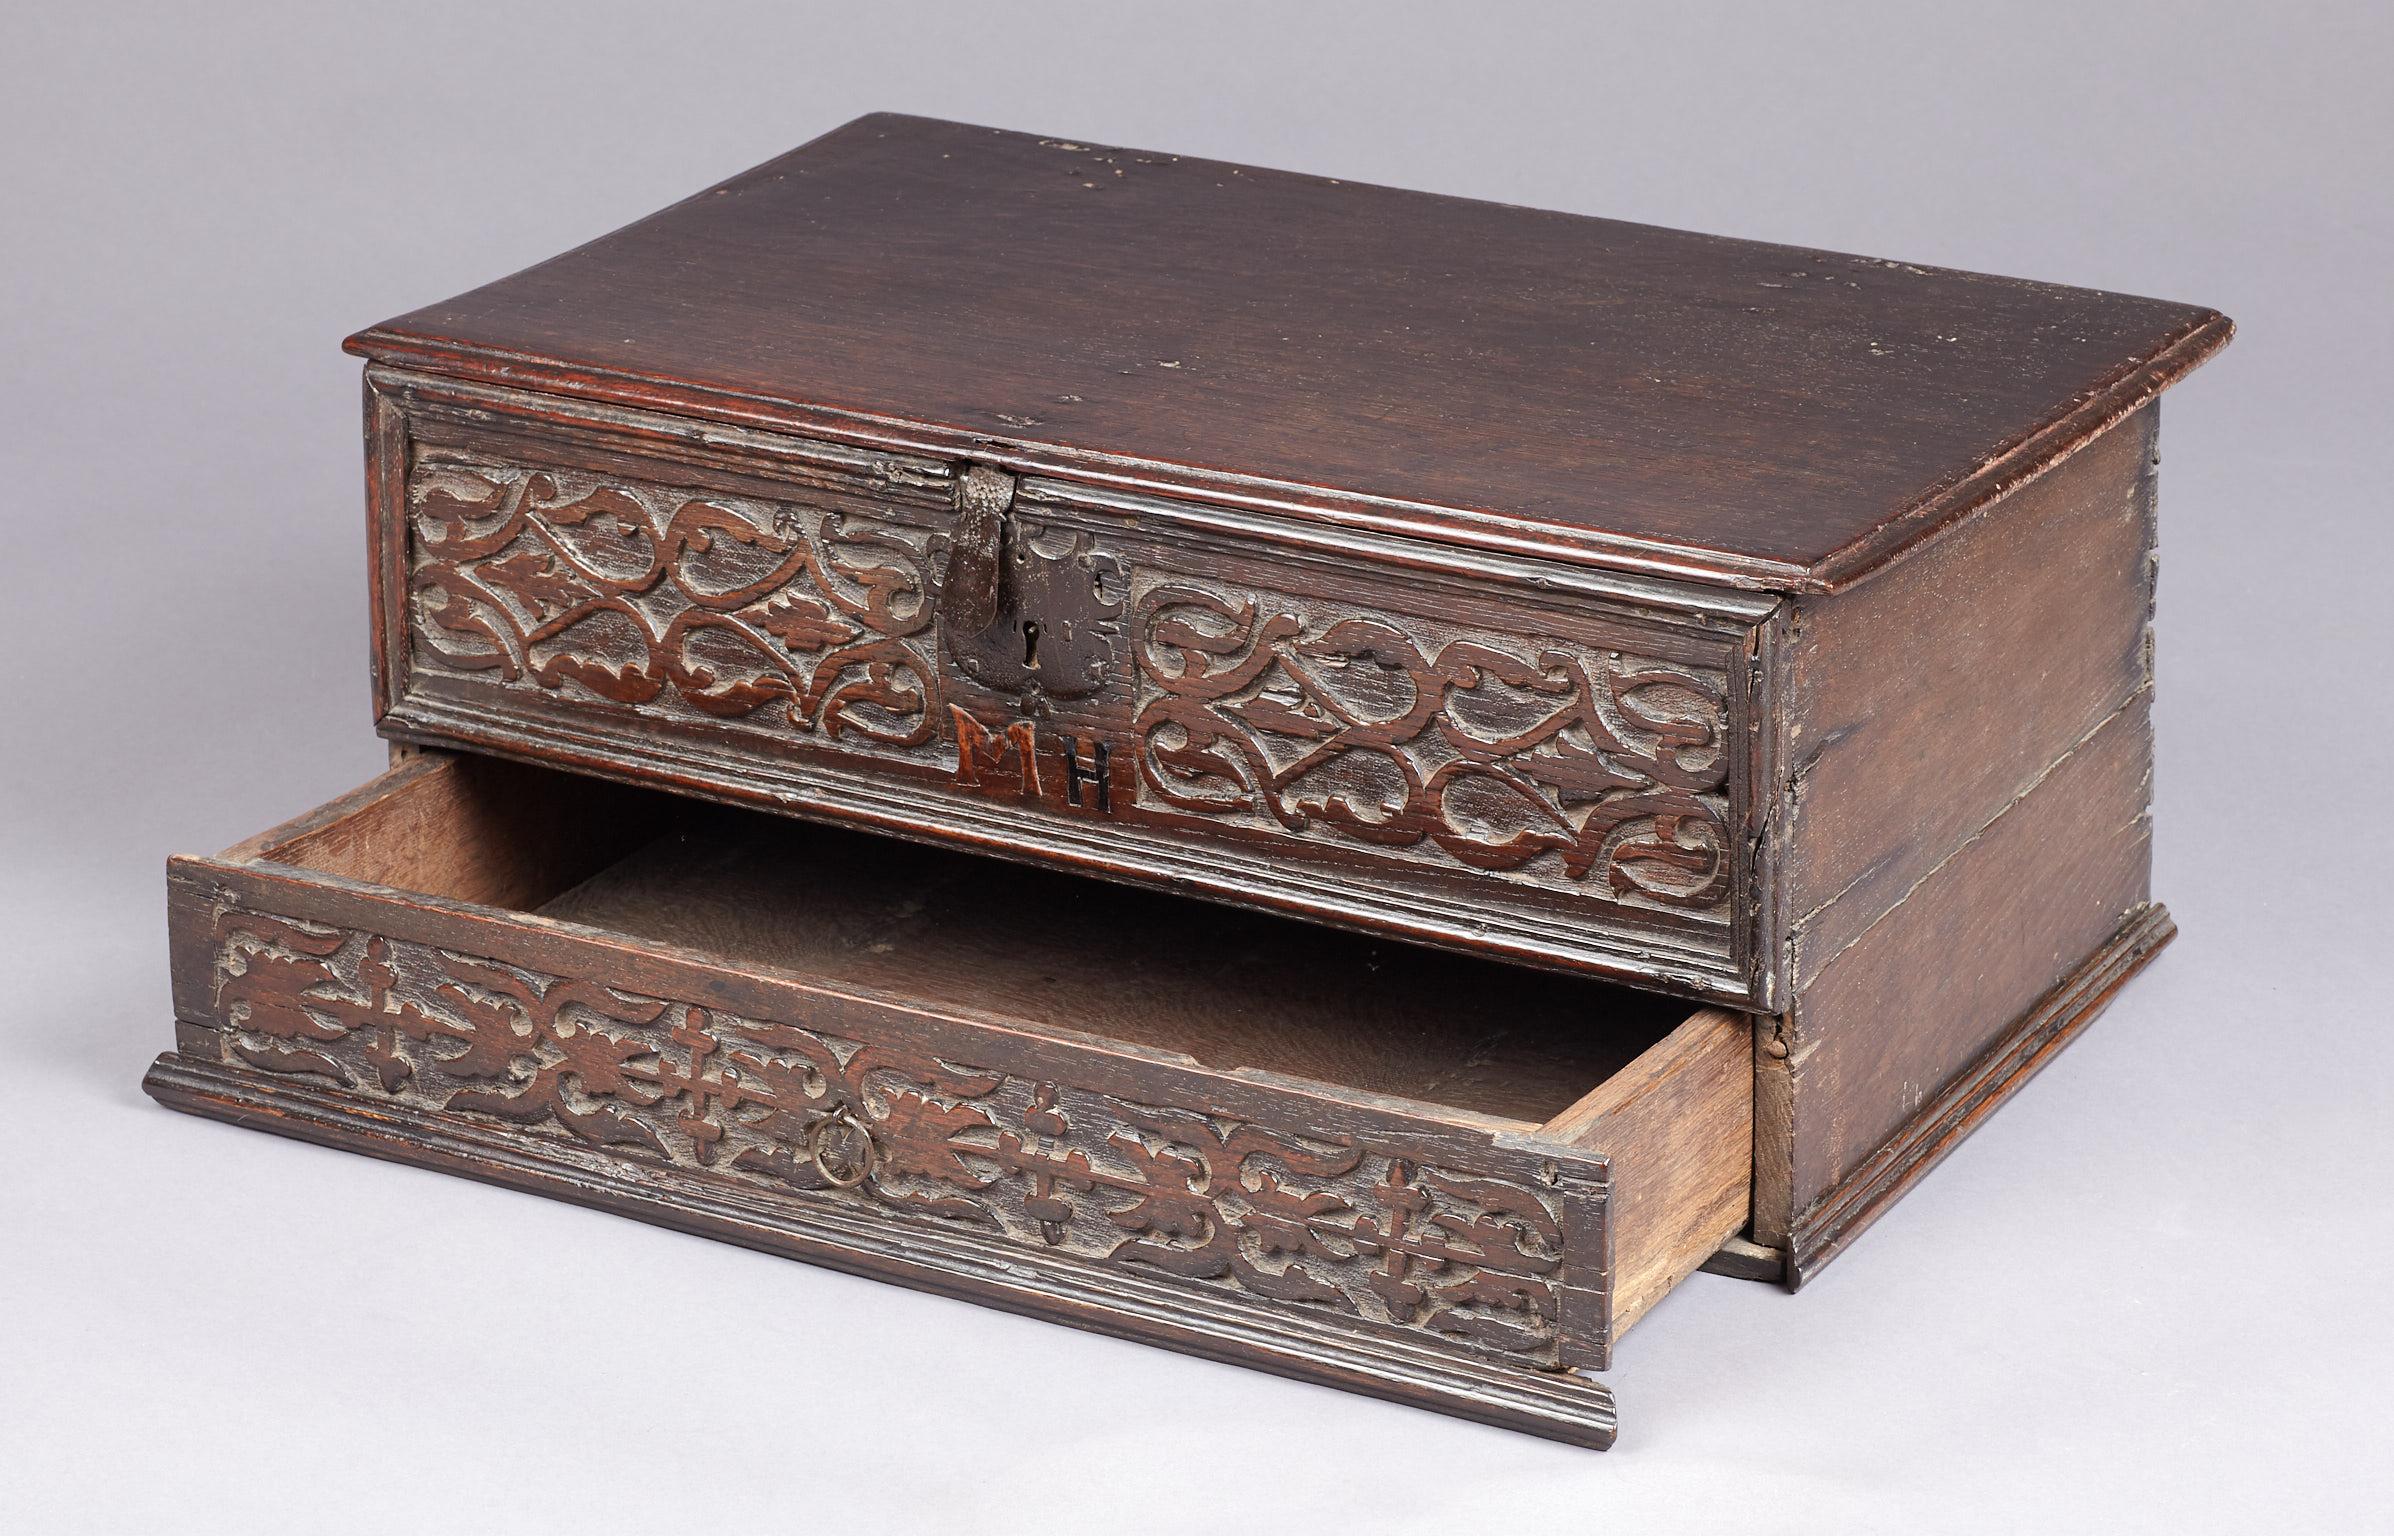 Carved Inlaid Oak Desk Box, Charles II period, Yorkshire, circa 1660-1680 For Sale